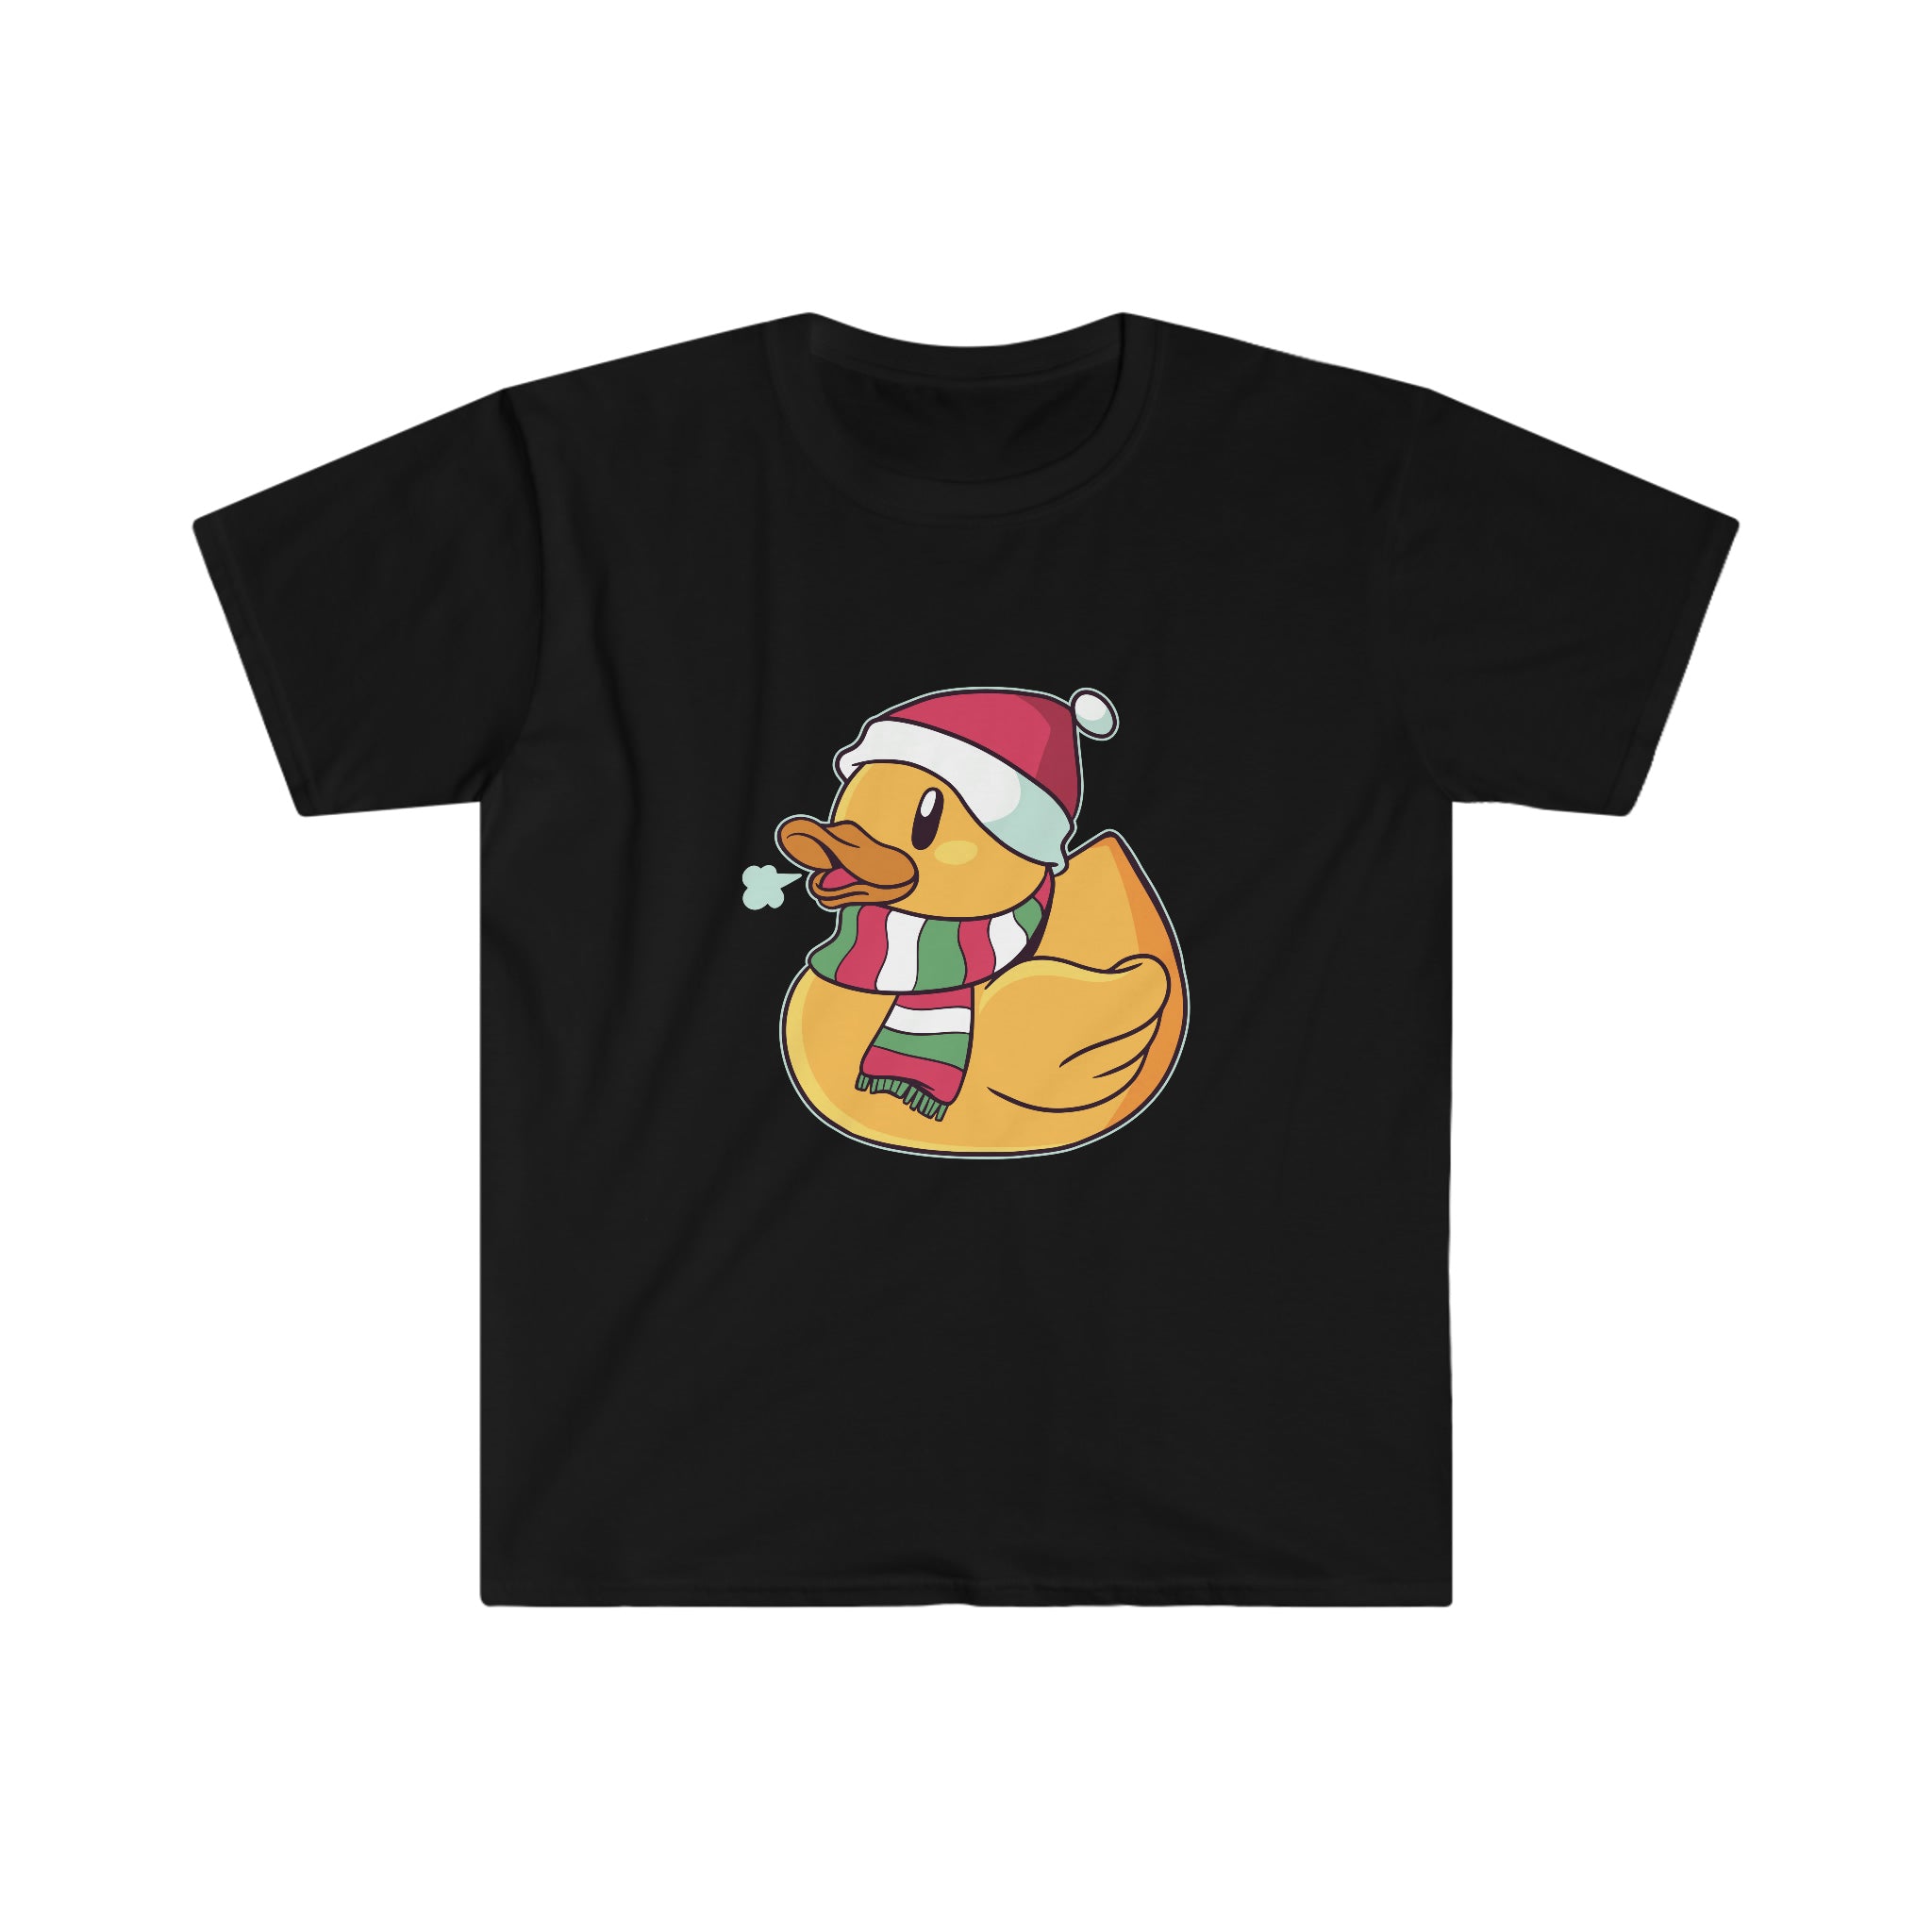 A black winter Windy Duck T-Shirt perfect for layering, featuring a festive duck adorned with a santa hat.